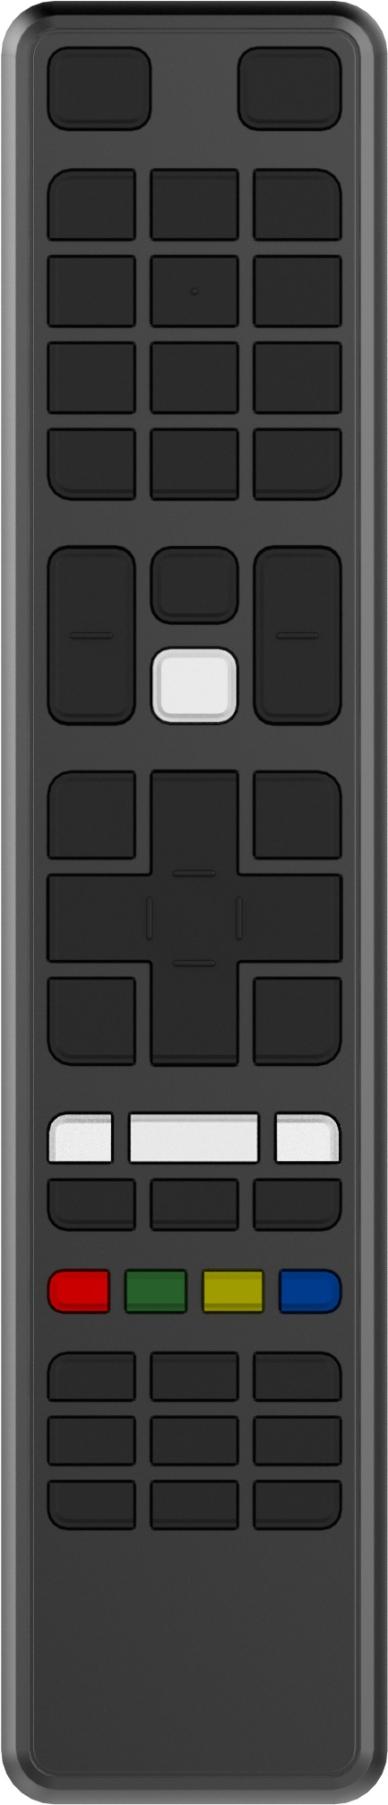 Remote Control 1. Standby: Switches On / Off the TV 2. Numeric buttons: Switches the channel, enters a number or a letter in the text box on the screen. 3.